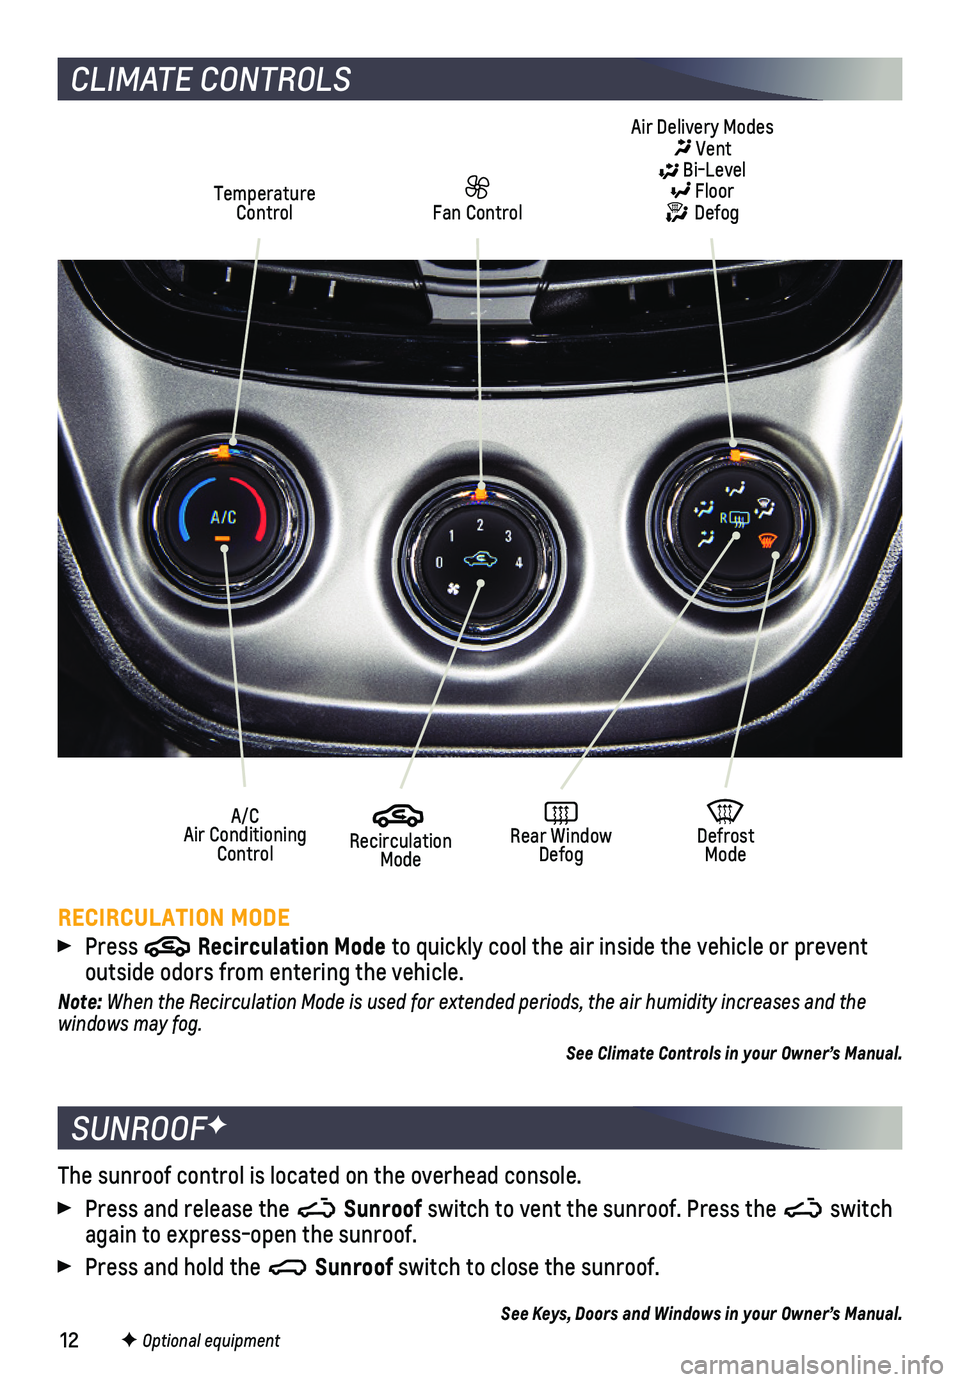 CHEVROLET SPARK 2020  Get To Know Guide 12
CLIMATE CONTROLS
RECIRCULATION MODE
 Press  Recirculation Mode to quickly cool the air inside the vehicle or prevent  
outside odors from entering the vehicle.
Note: When the Recirculation Mode is 